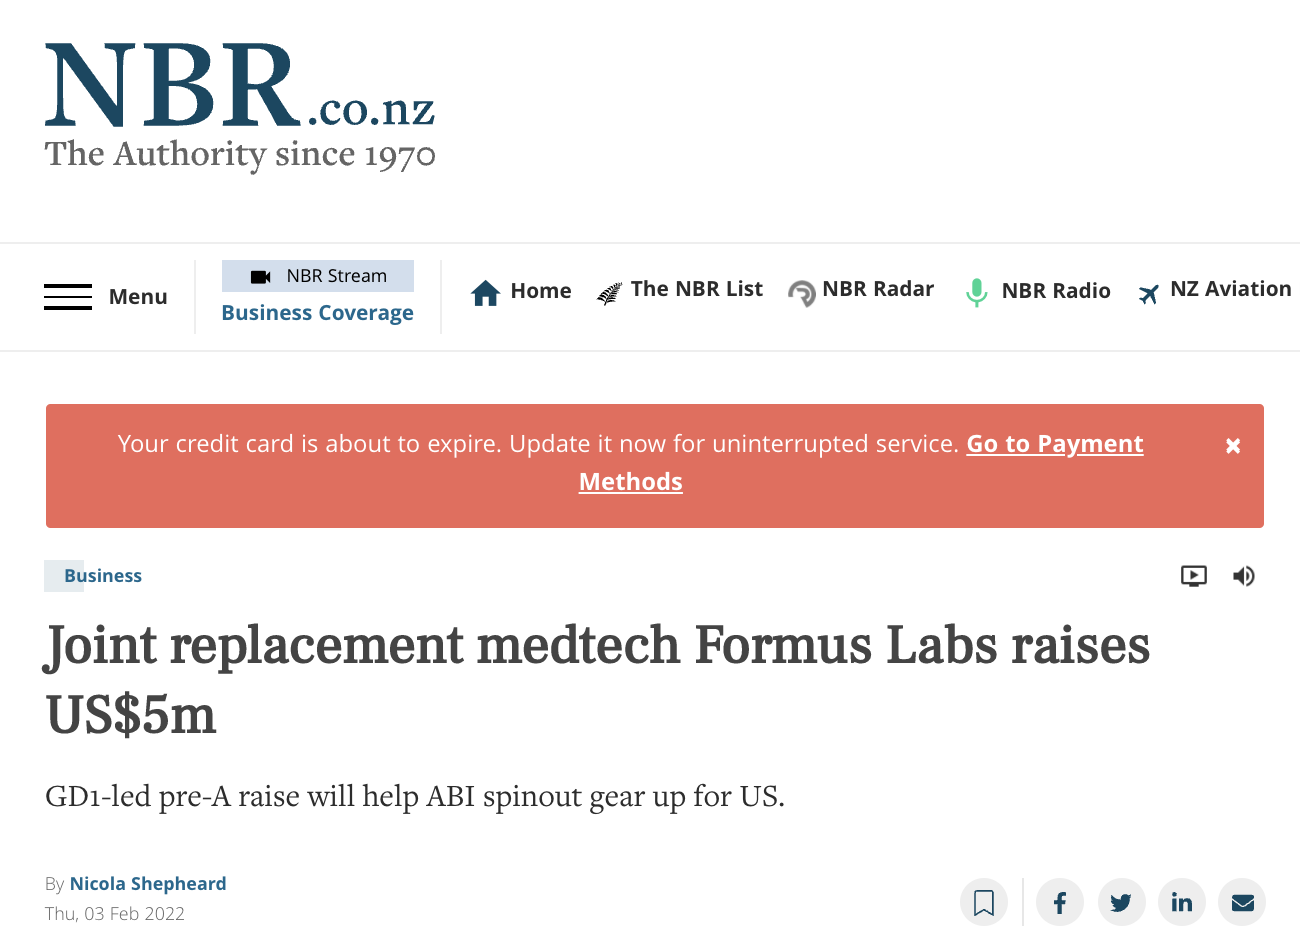 Formus Labs features in NBR